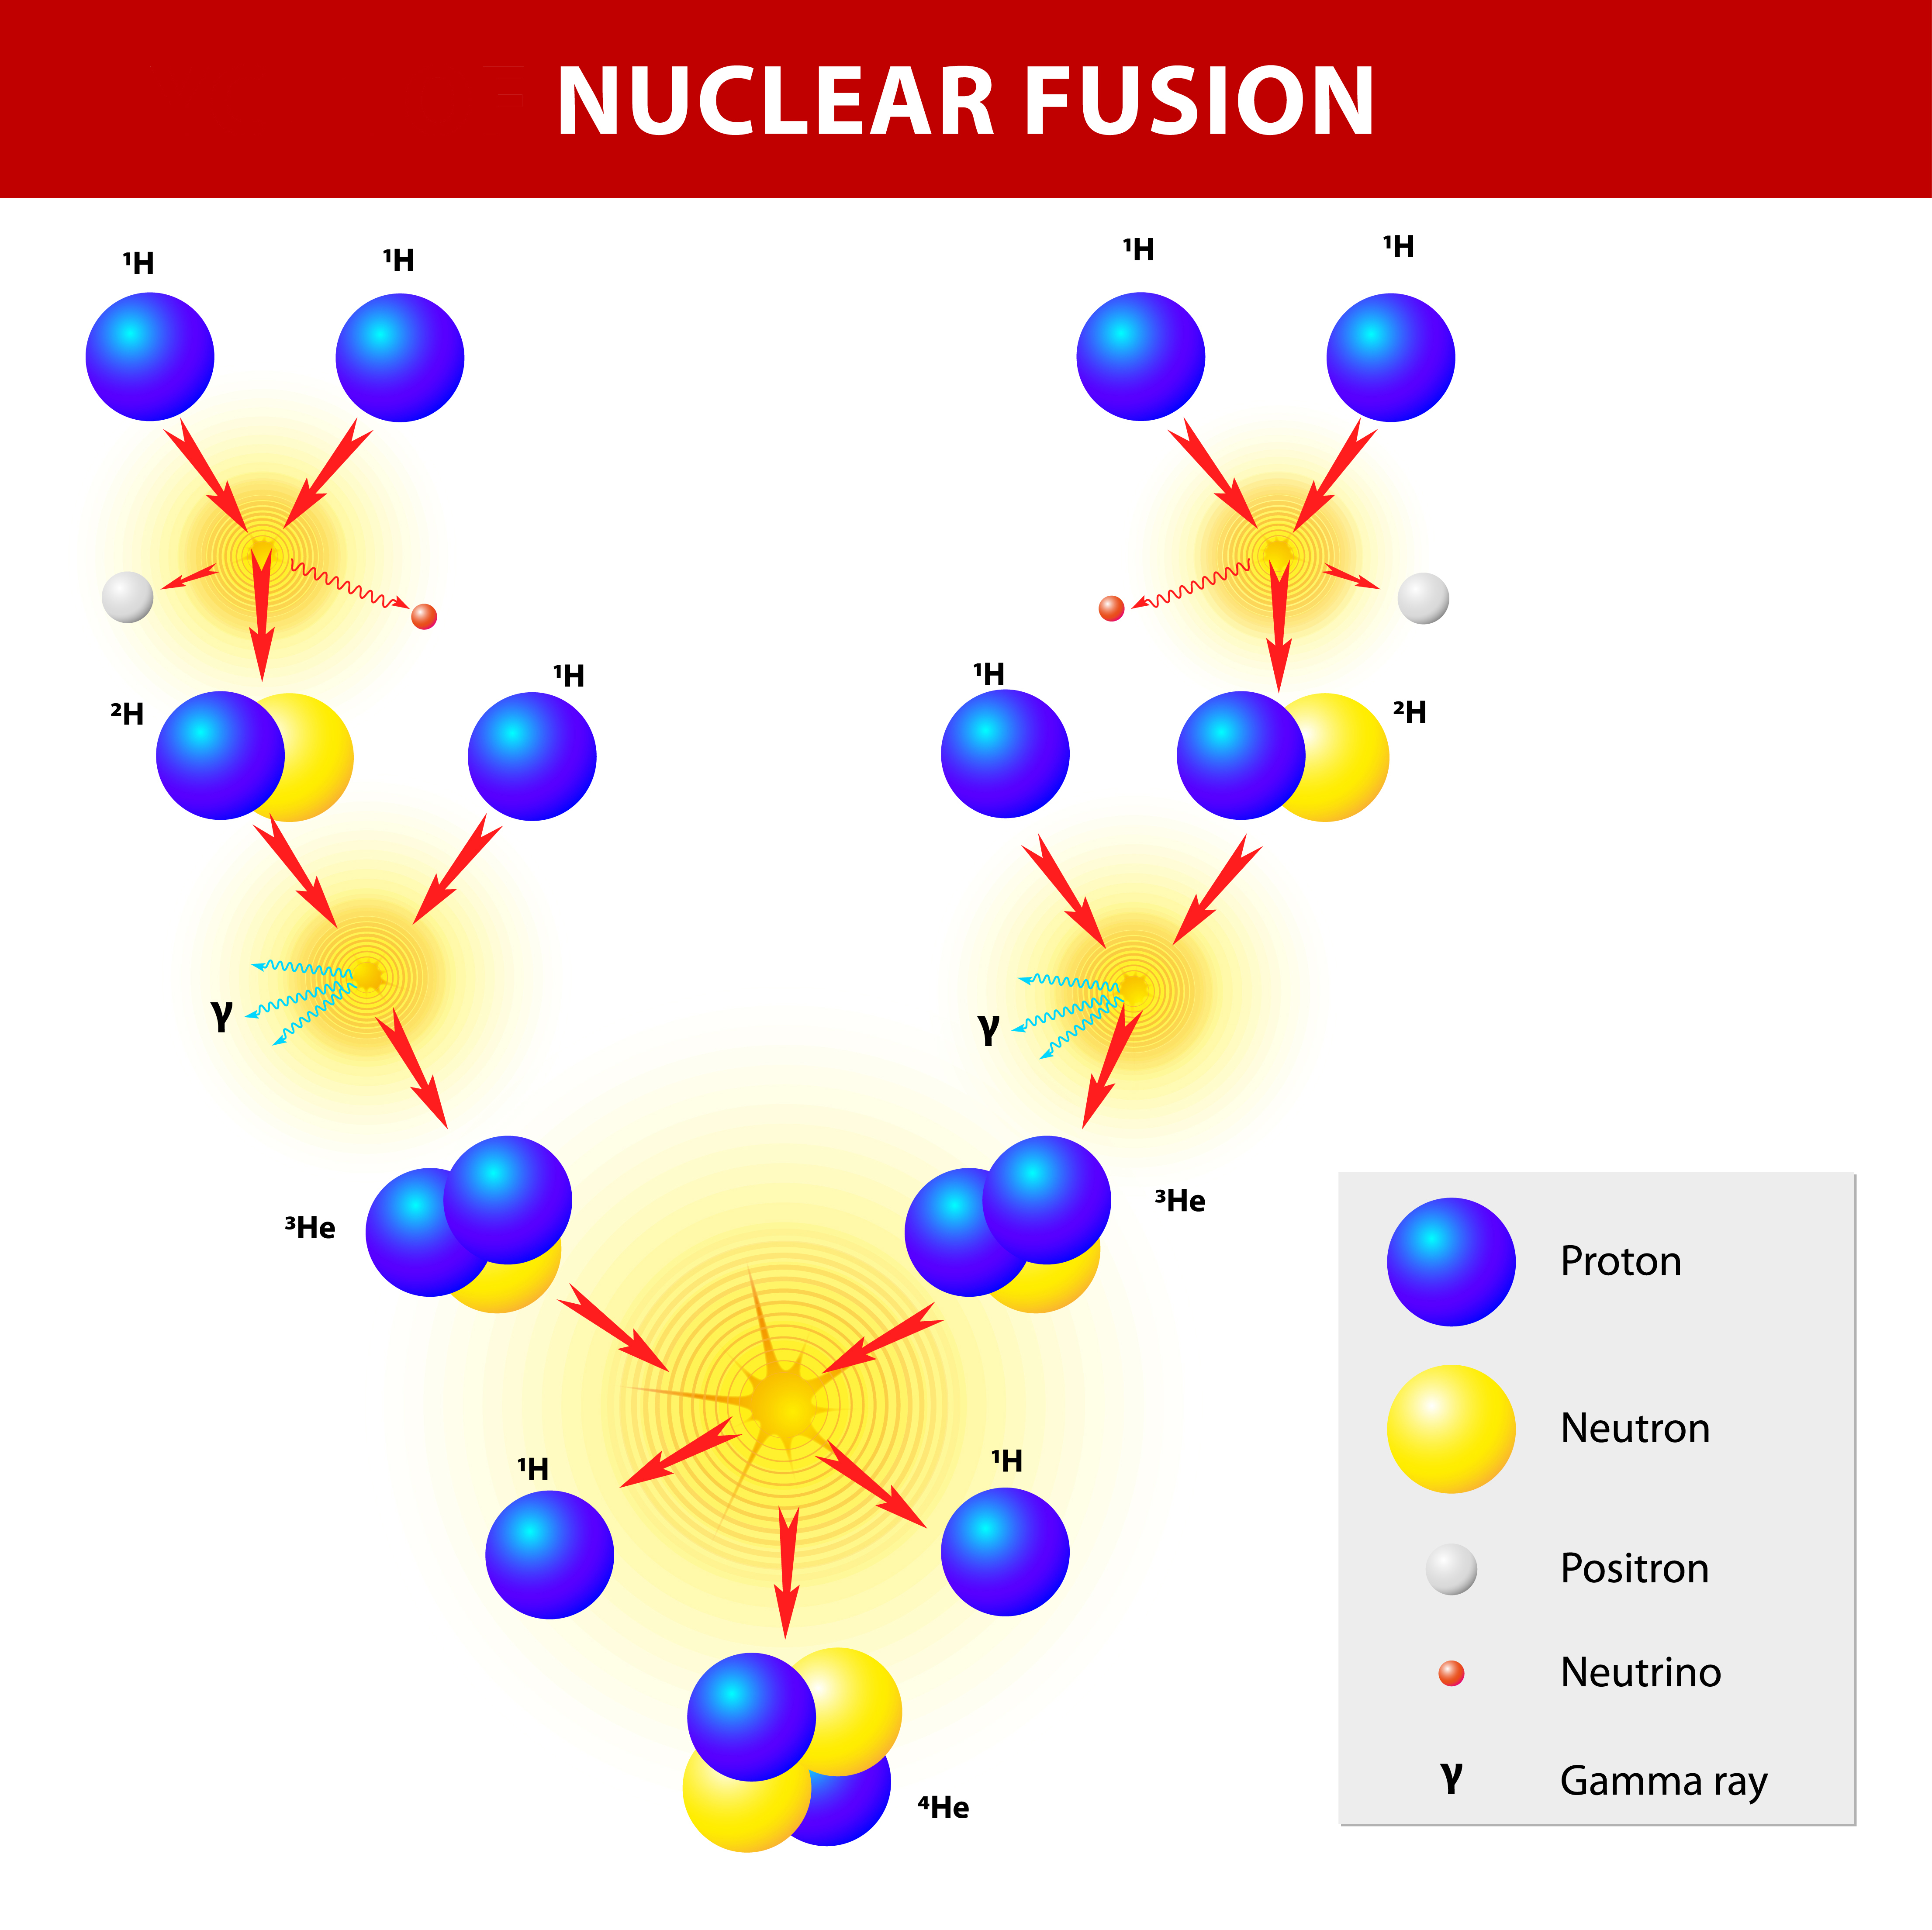 Sun generates energy by nuclear fusion